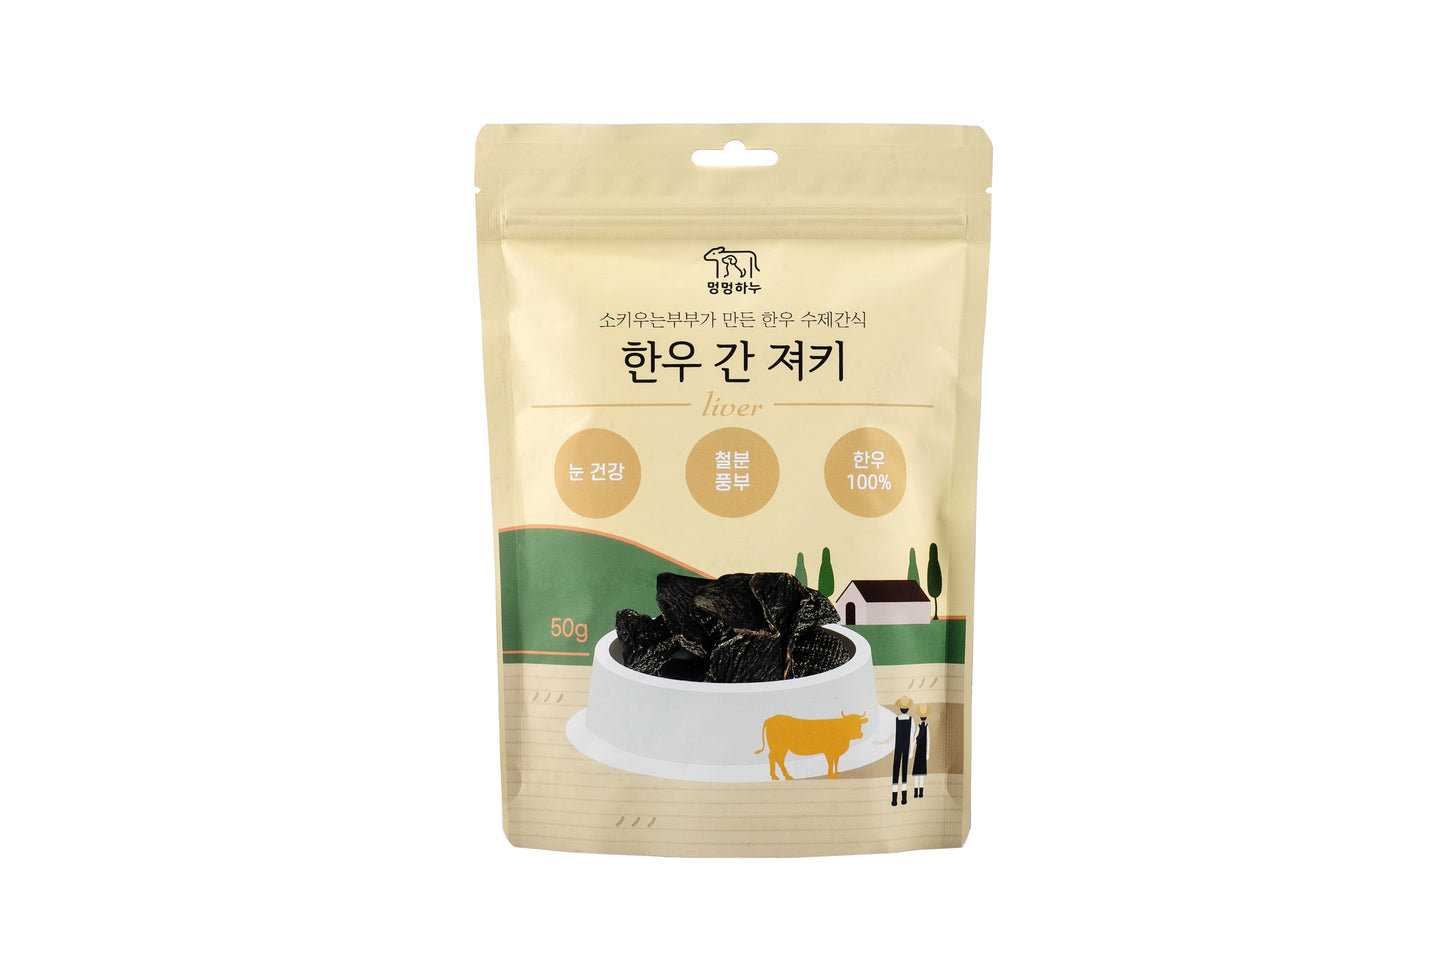 Premium Korean Beef Liver Jerky 50g: The Beloved Dog Treat Made with 100% Domestic Korean Beef!